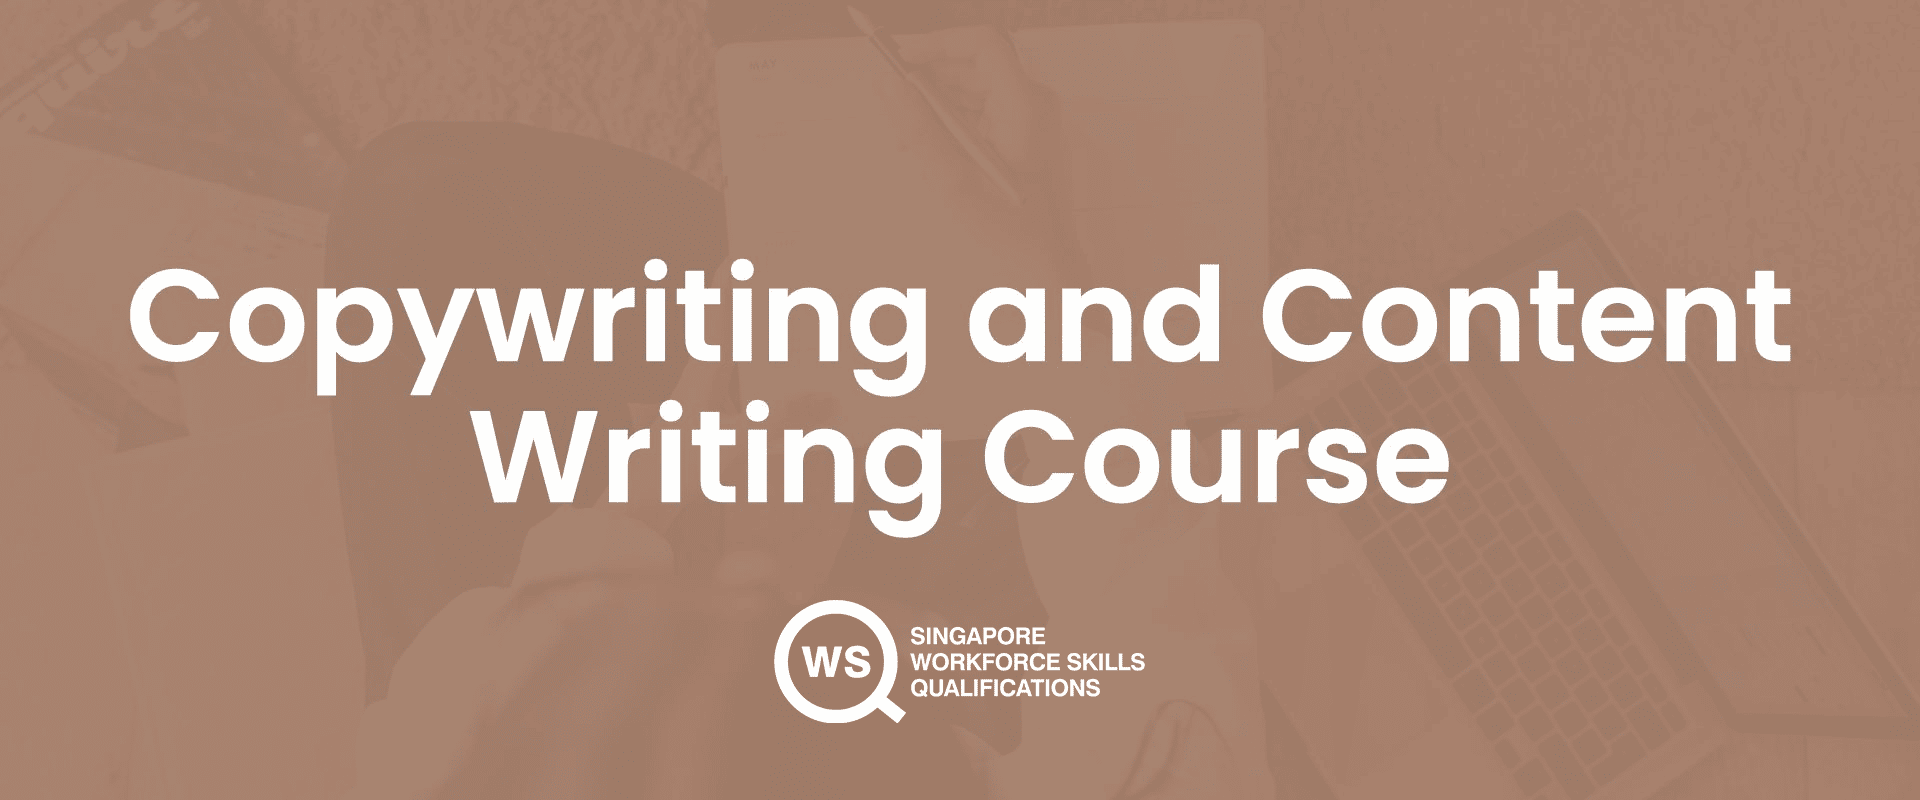 Copywriting and content writing course cover